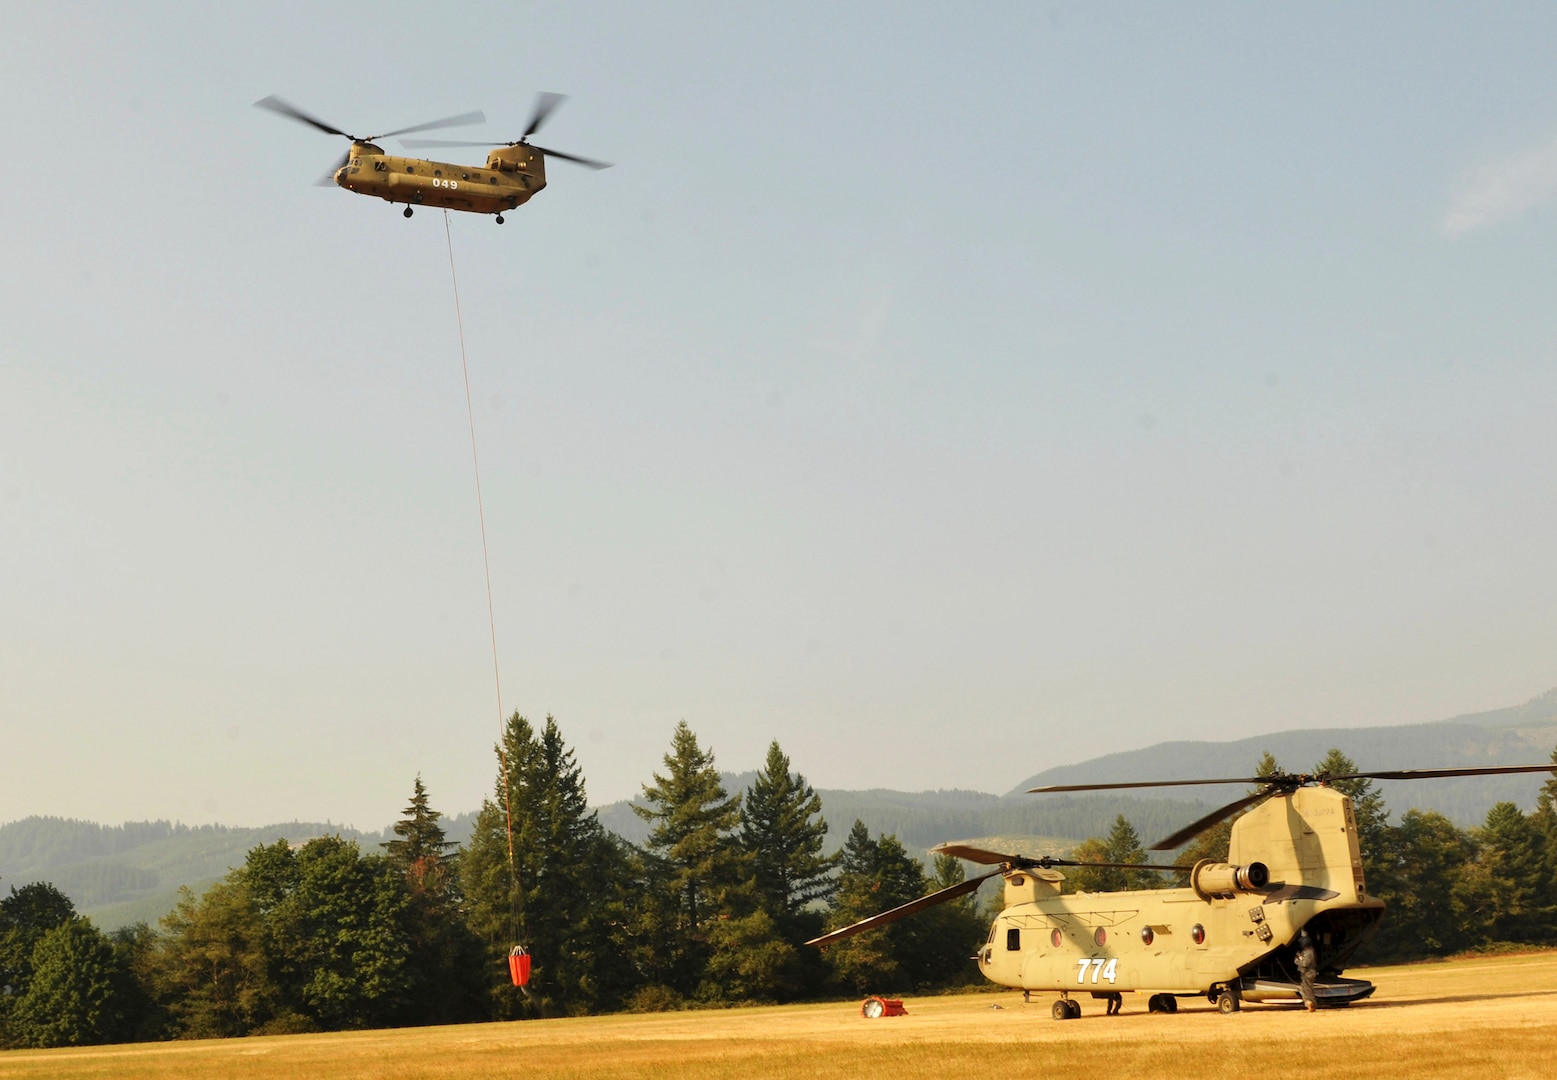 Oregon Army National Guard Soldiers with 1st Battalion, 168th Aviation Regiment, land a CH-47 Chinook helicopter for refueling at Davis helibase near Gates, Oregon, August 7, 2017. Some Guard crews and helicopters have been mobilized this week to assist in wildfire suppression efforts in the state.